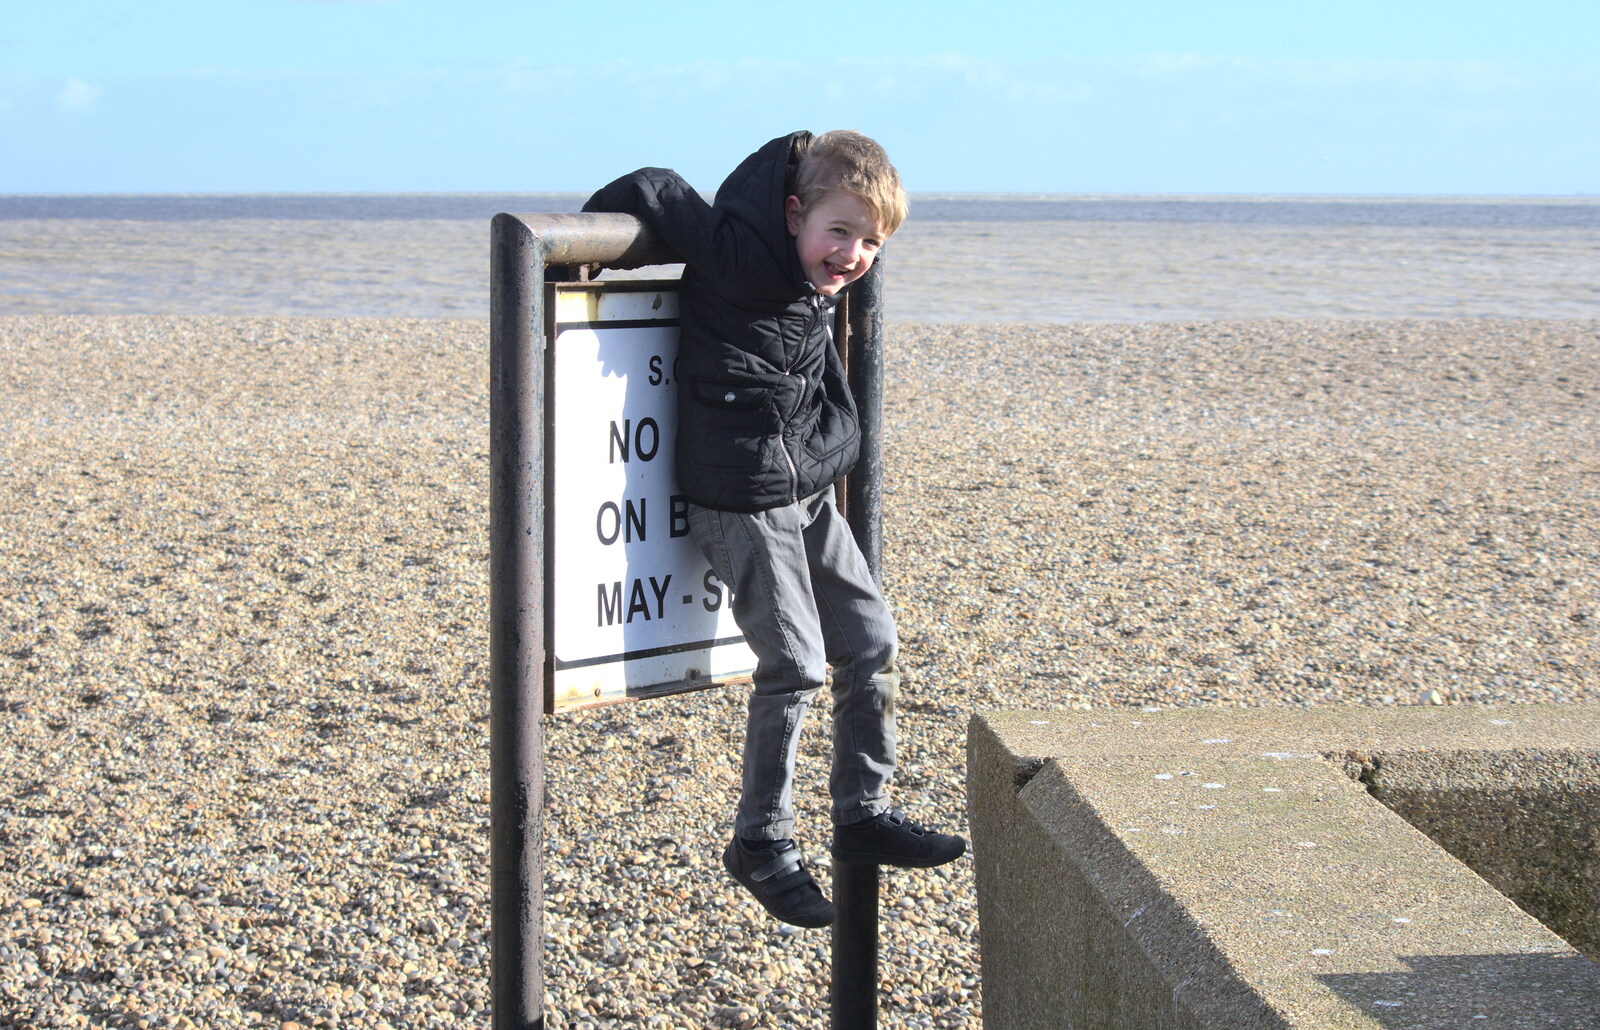 Fred literally hangs around from A Trip to Aldeburgh, Suffolk - 7th February 2016